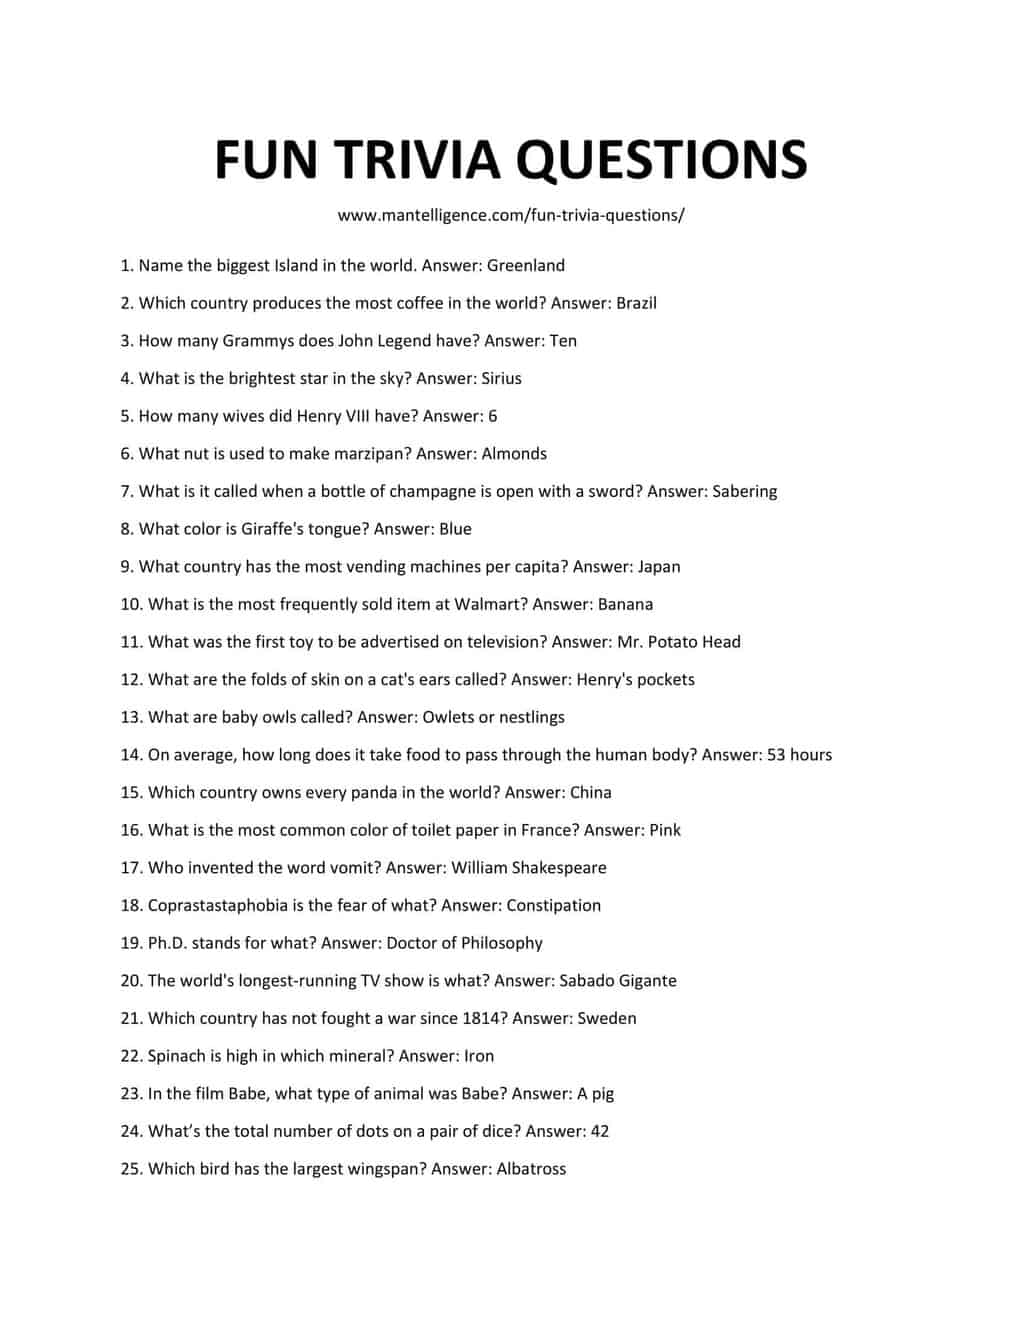 trivia-quiz-questions-best-trivia-and-quiz-questions-in-the-web-zohal